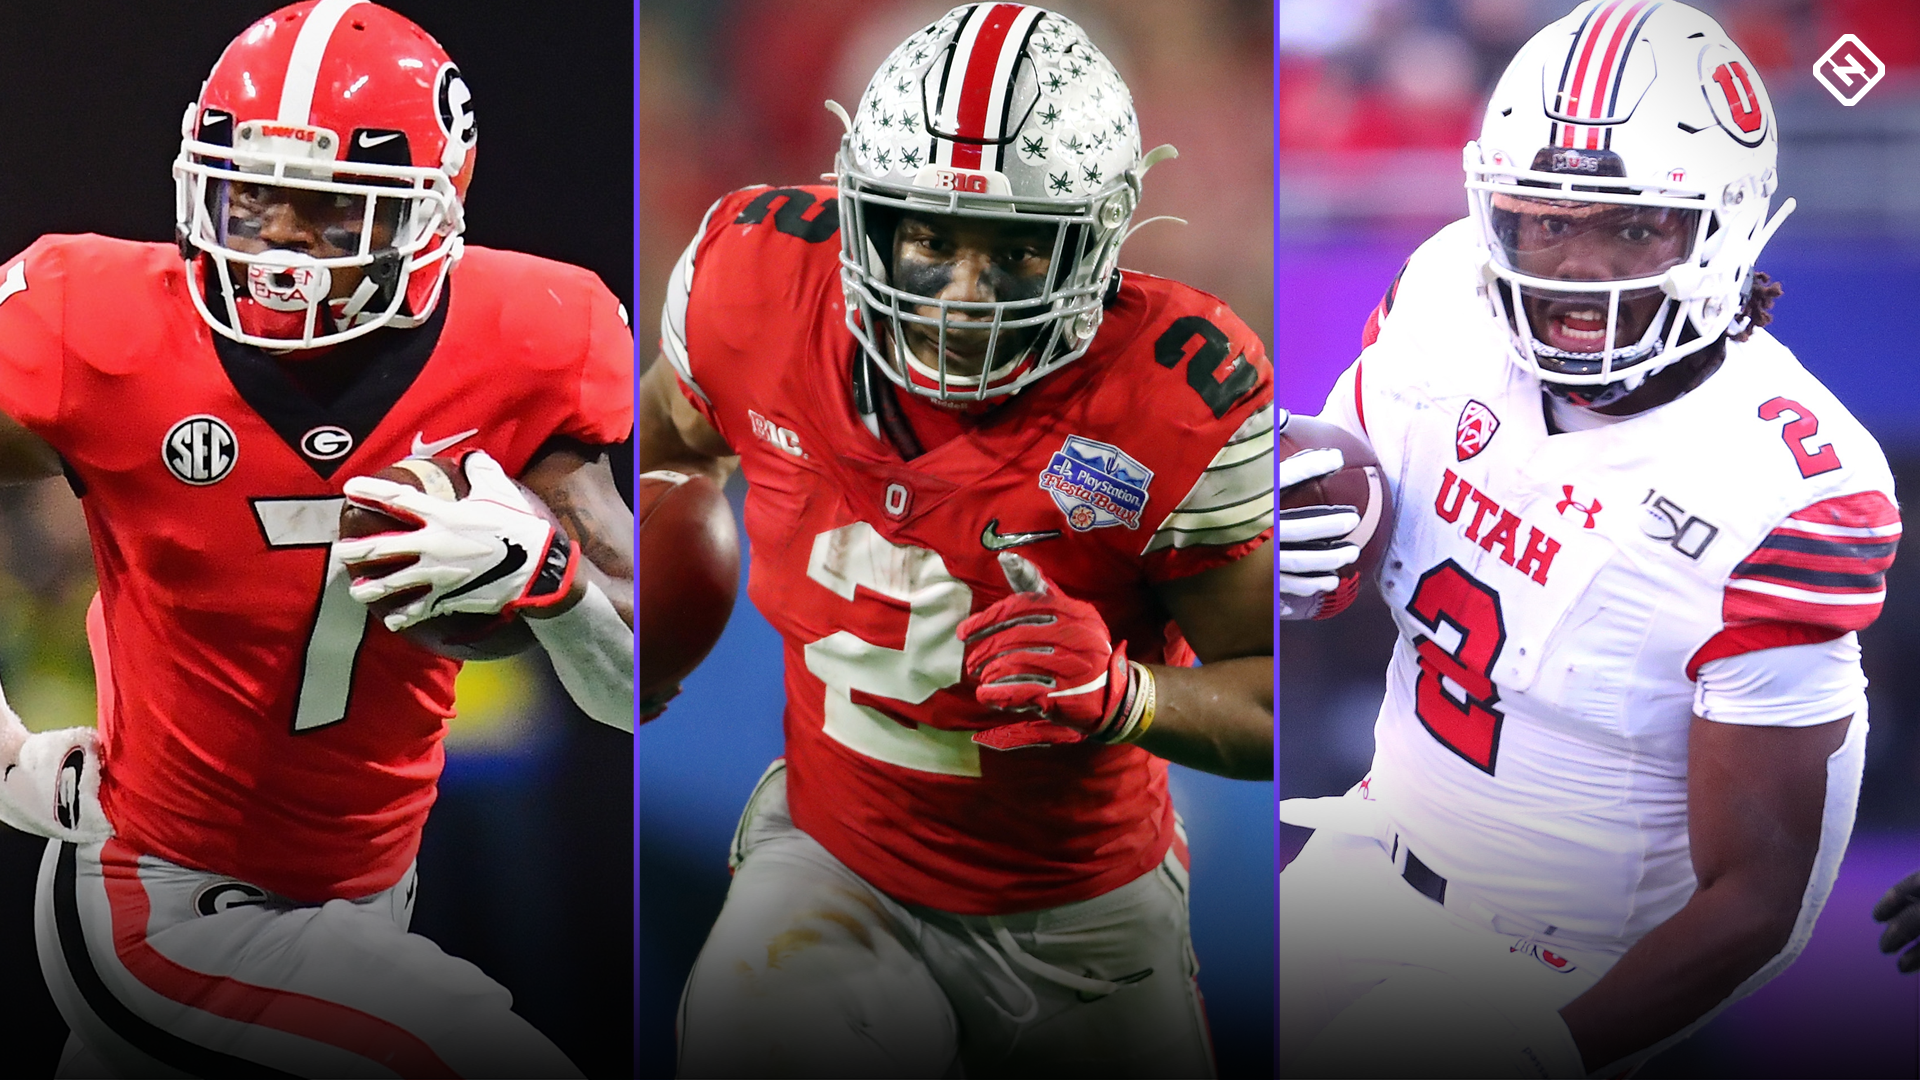 Nfl Draft Prospects 2020 The Top 10 Running Backs Ranked